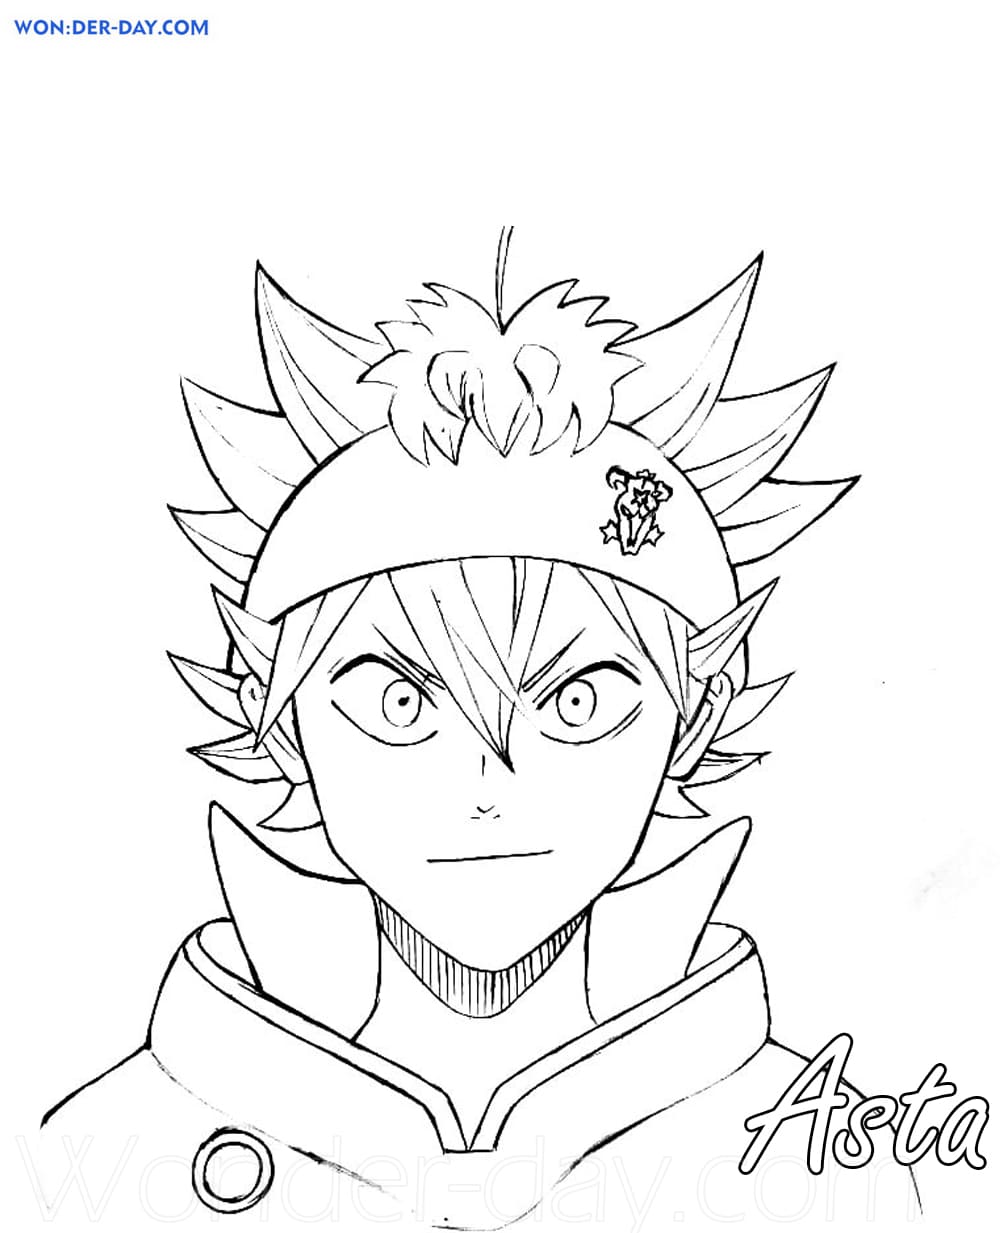 Black Clover coloring pages   Printable coloring pages